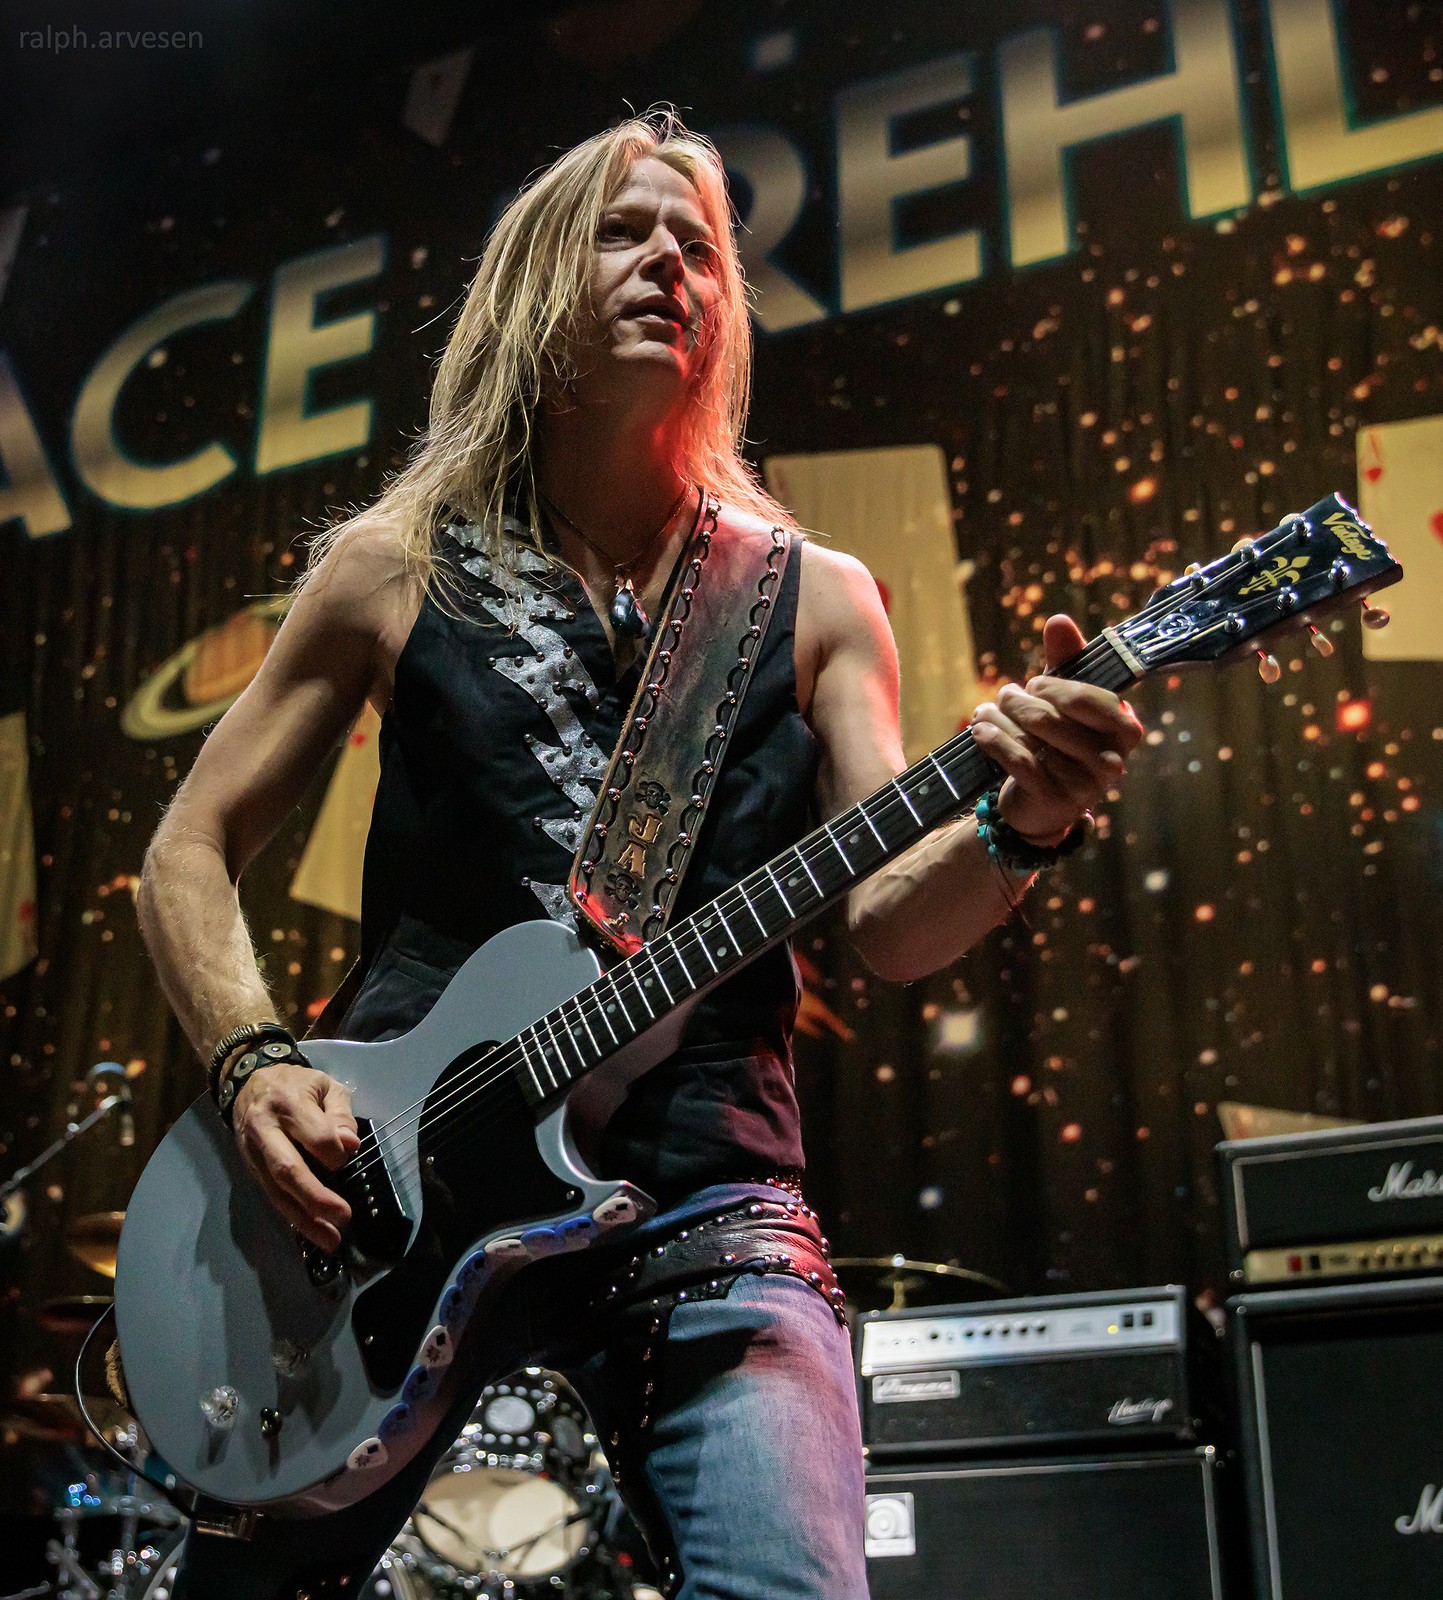 Ace Frehley | Texas Review | Ralph Arvesen